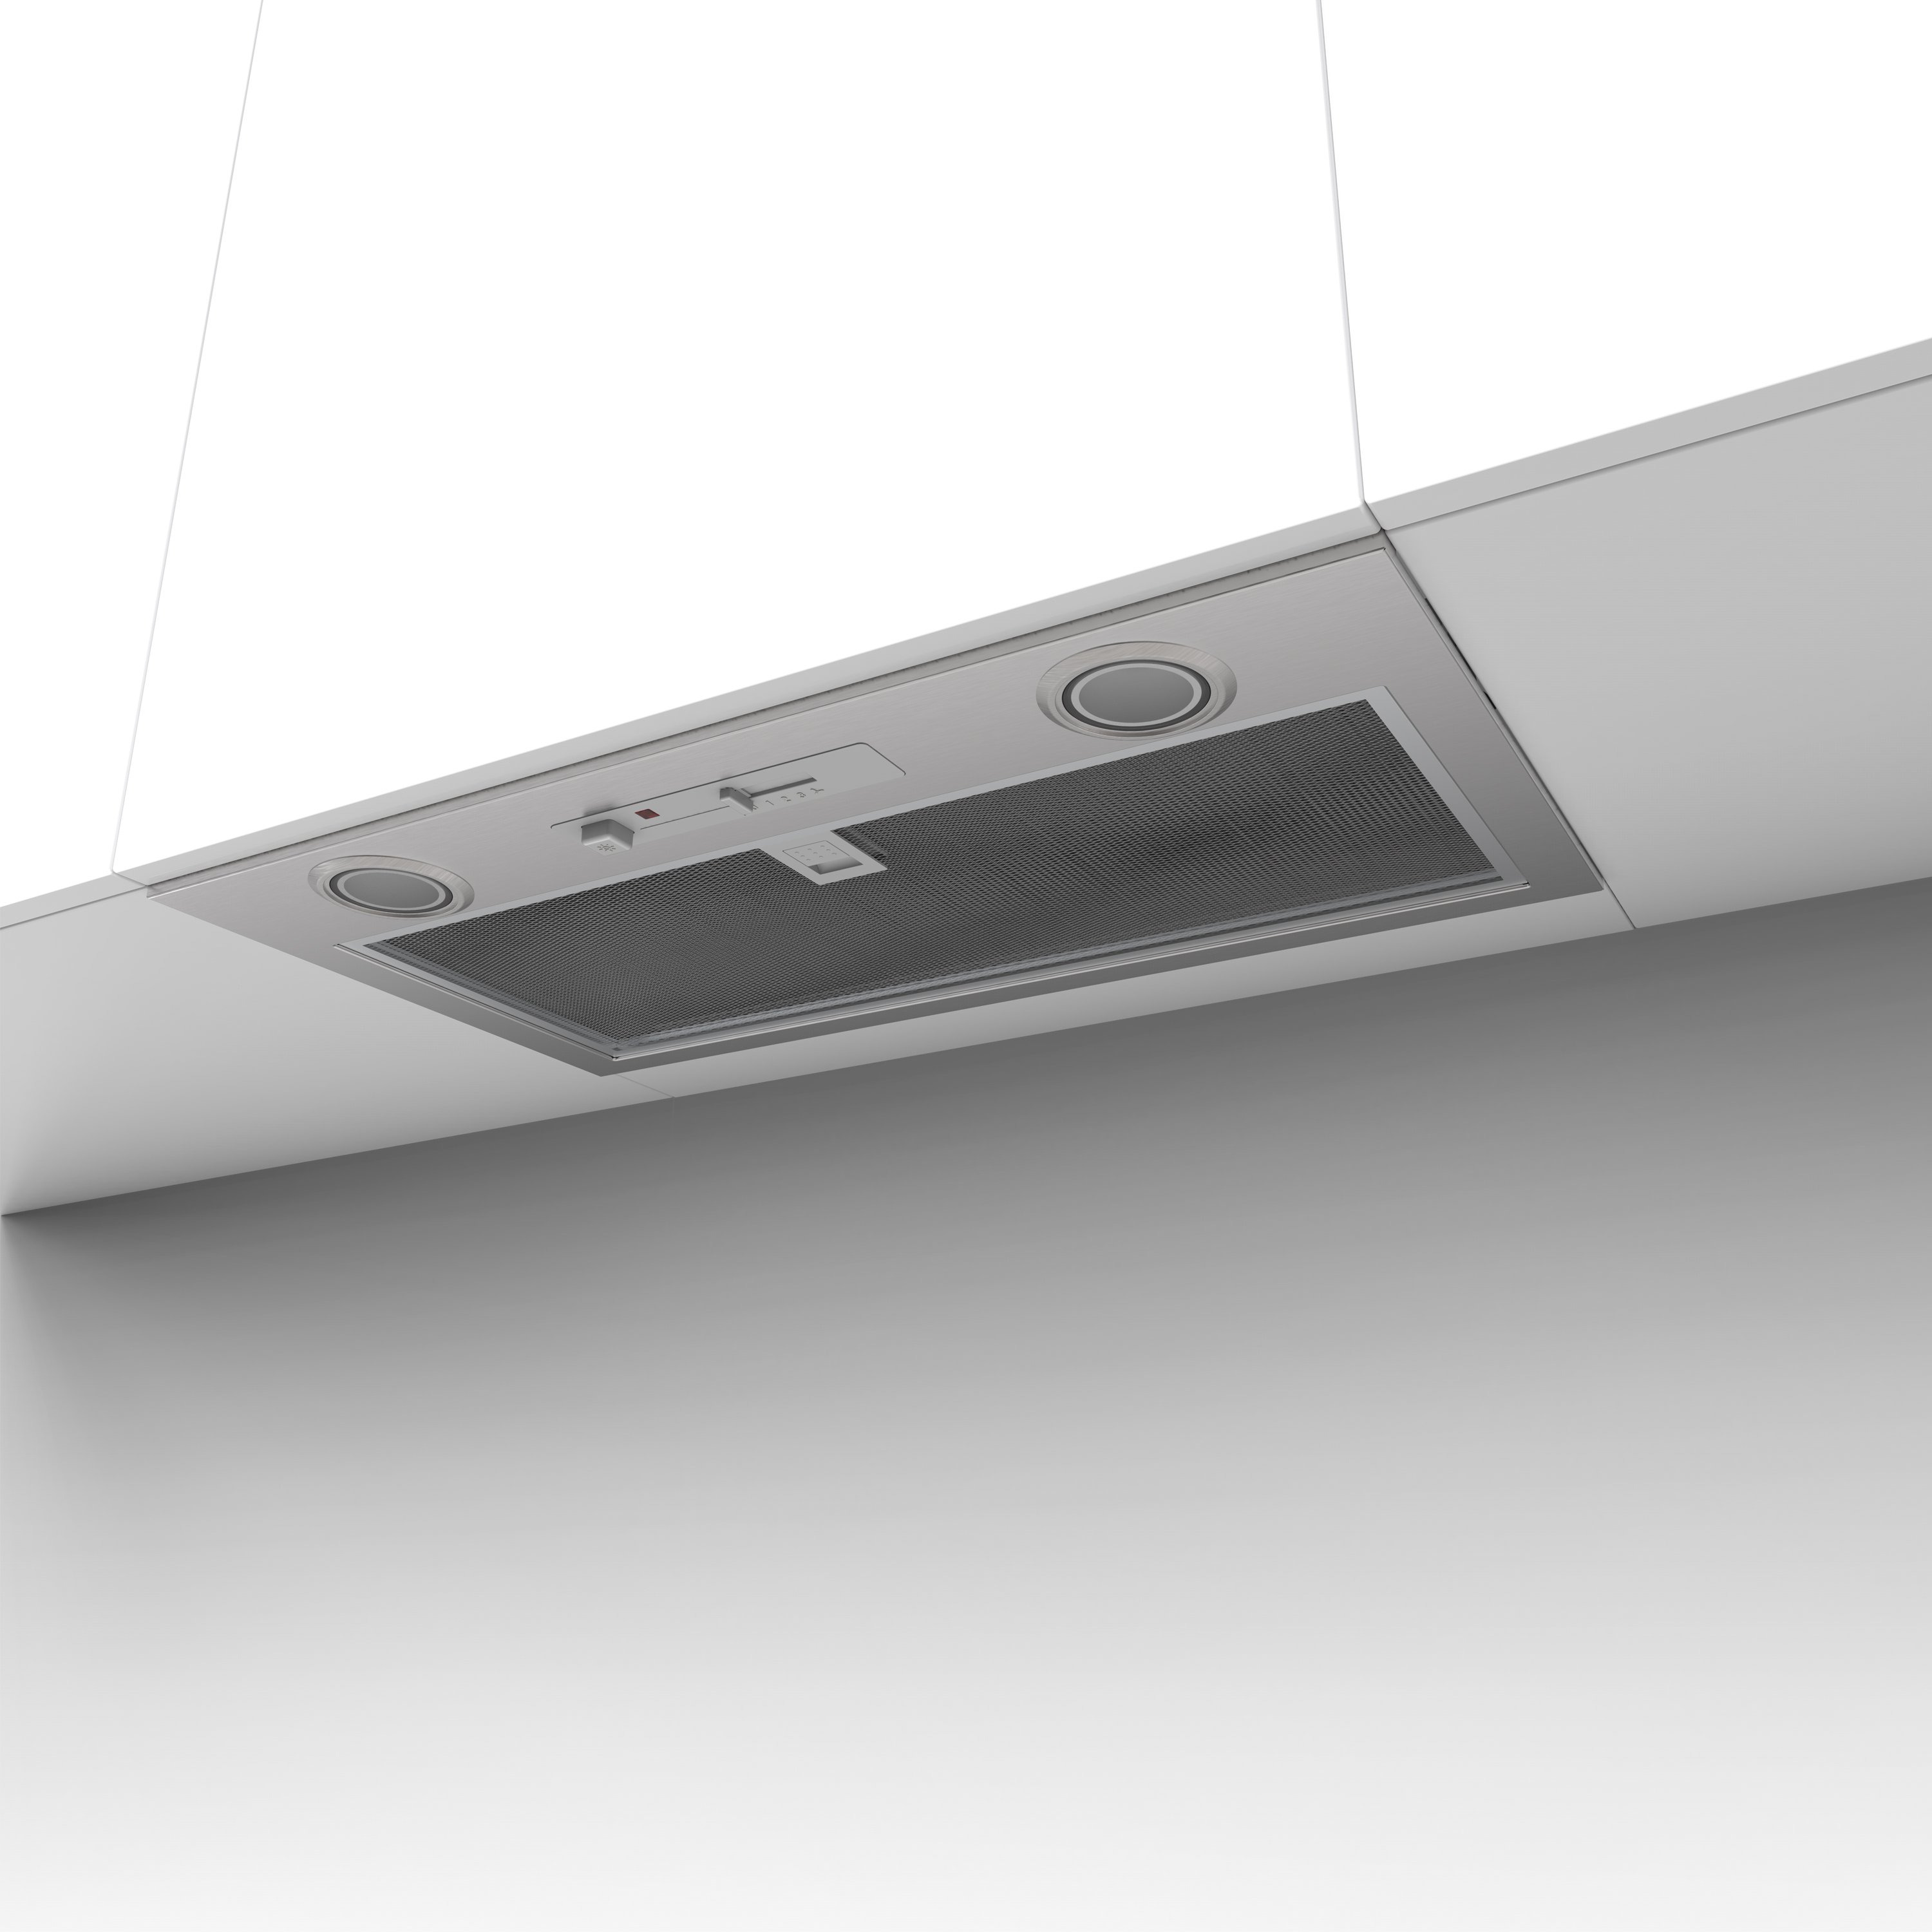 52cm Canopy hood with 3 fan speeds, 2 LED lights, washable grease filter and slider controls